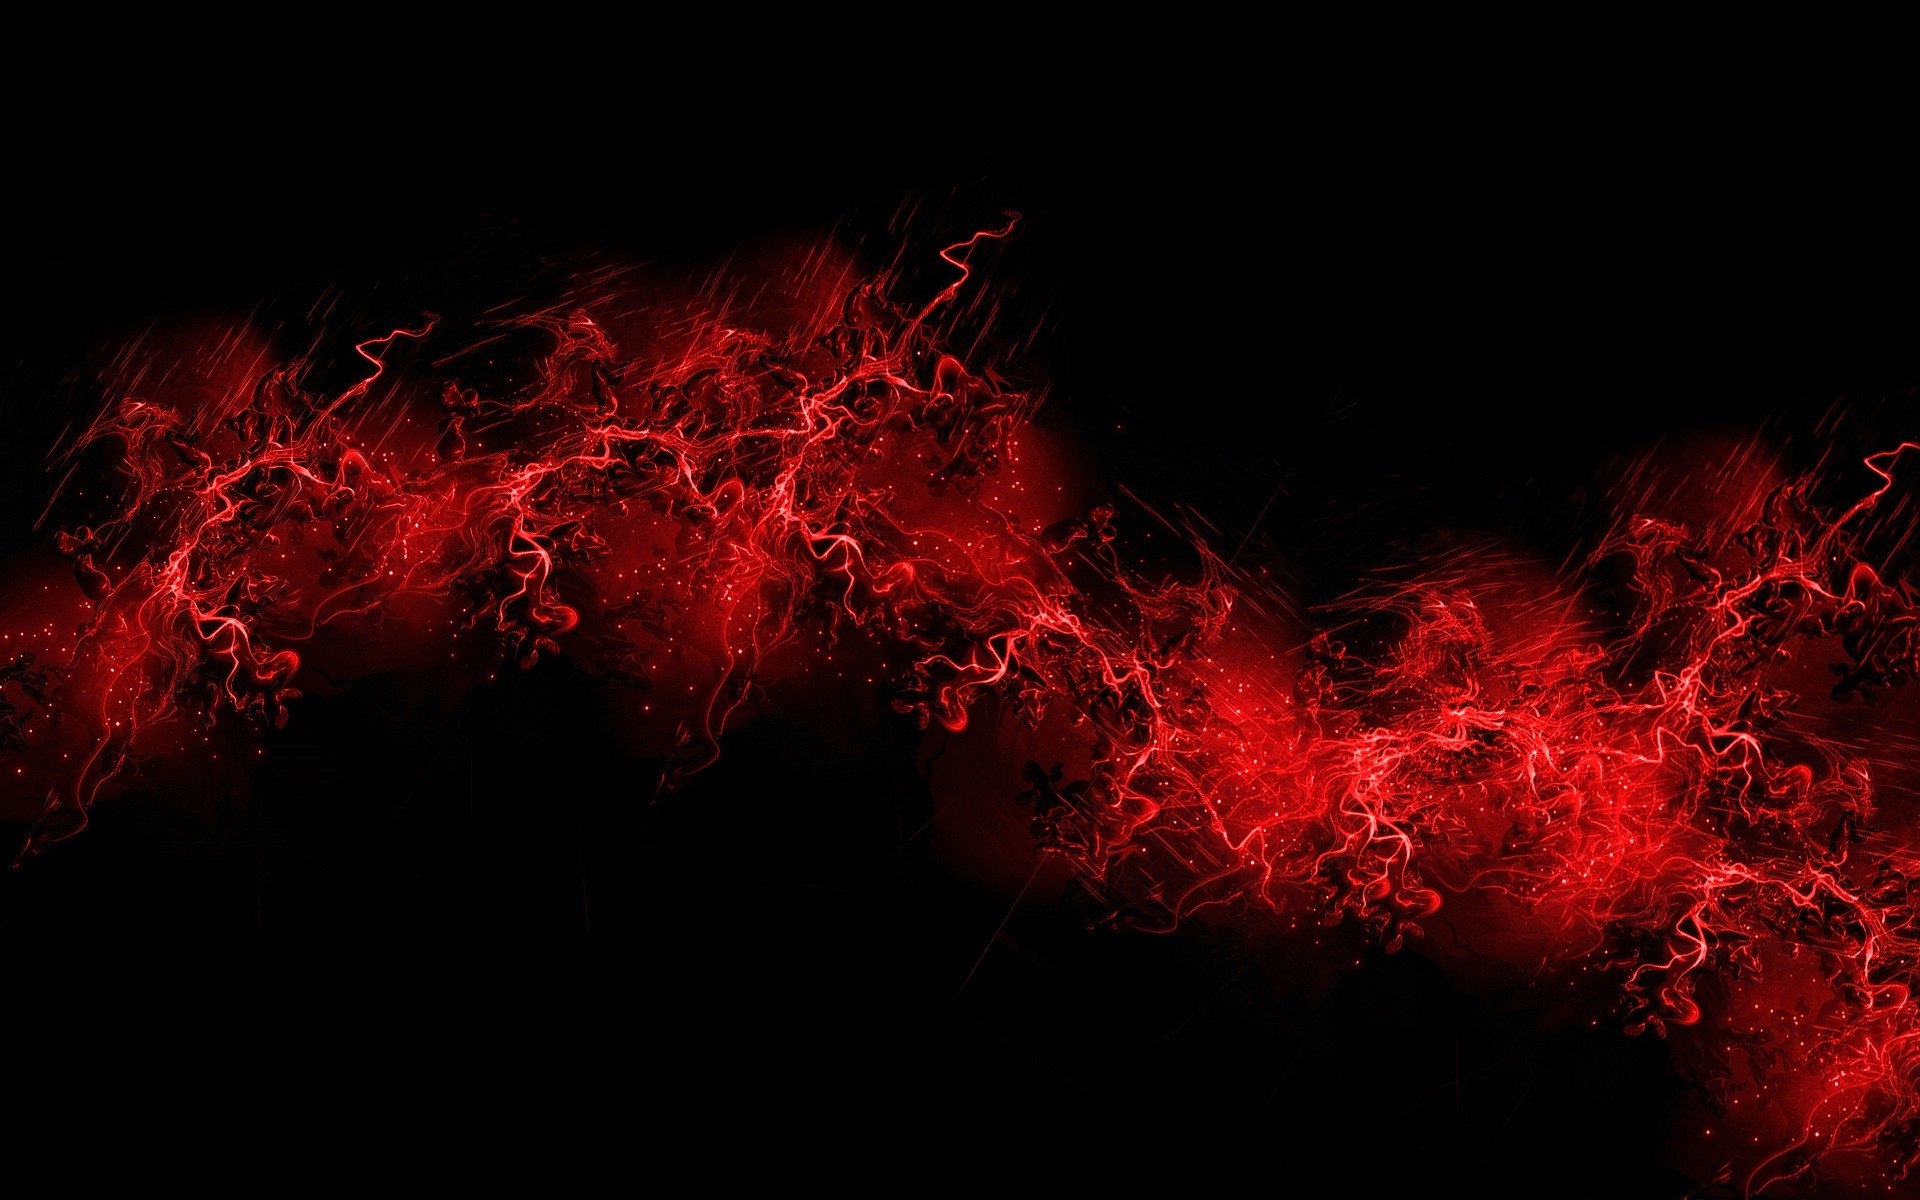 Black and red wallpaper hd